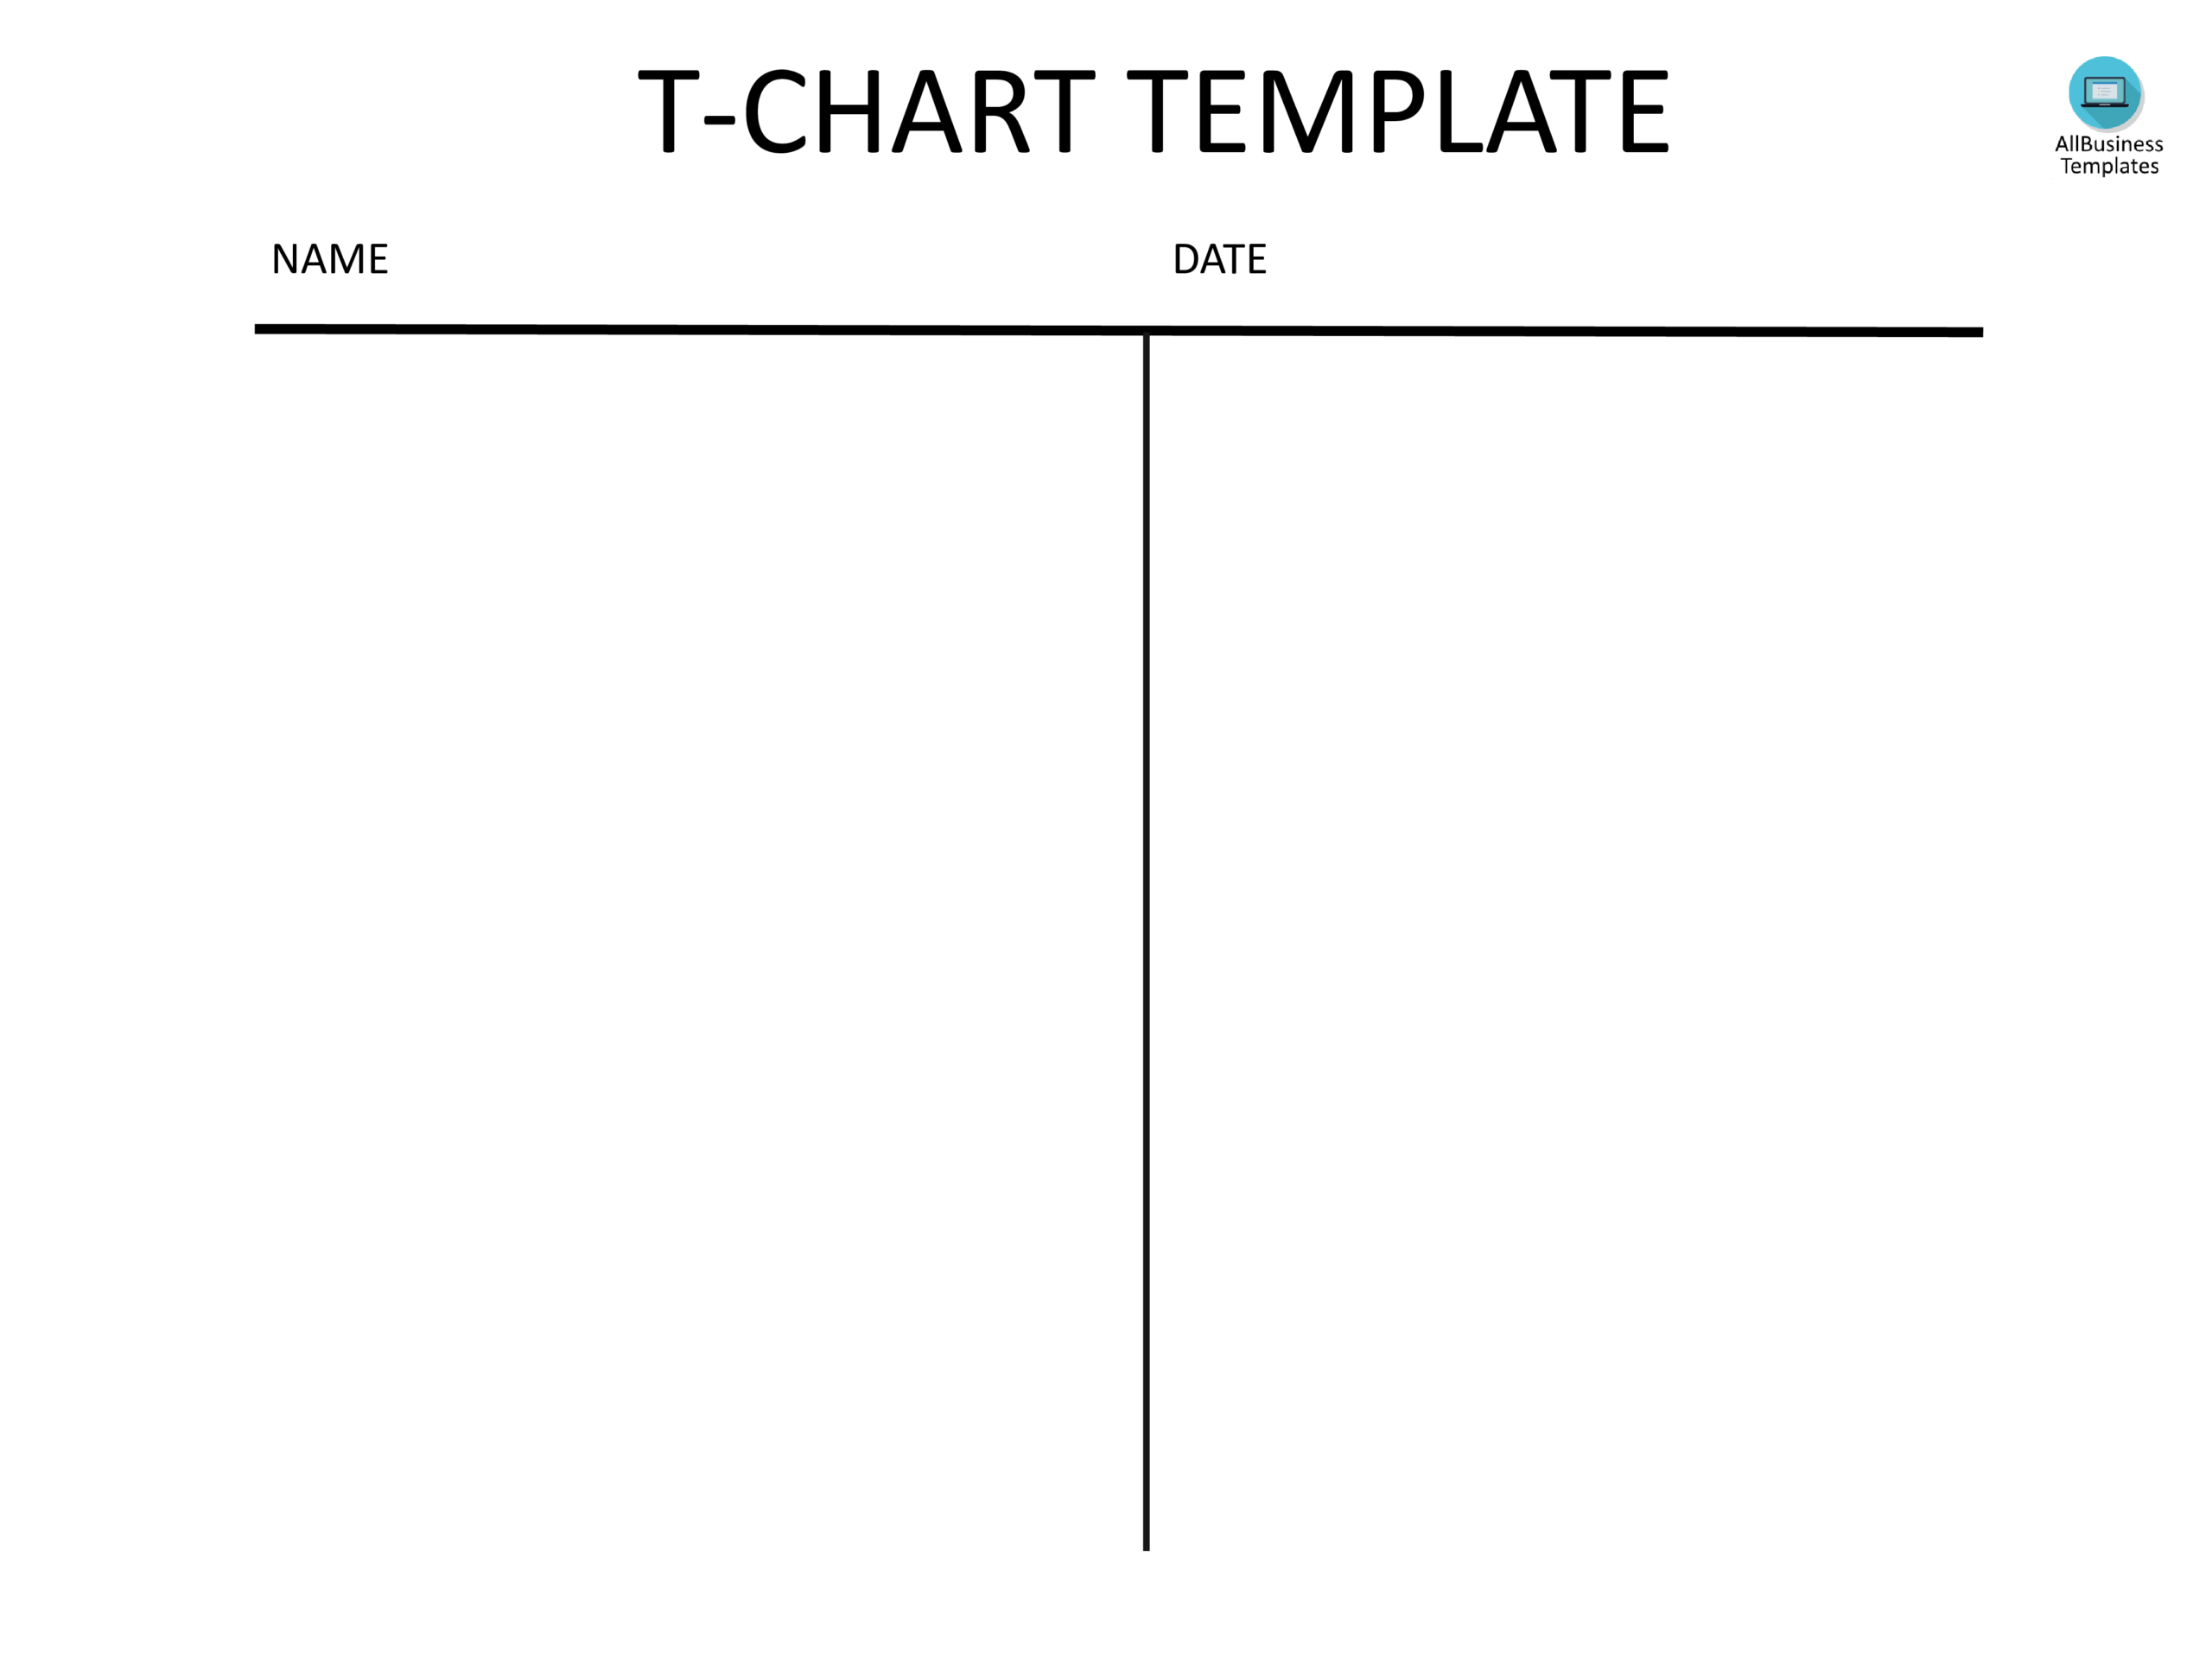 T Chart Template Pdf | Templates At Allbusinesstemplates Pertaining To T Chart Template For Word